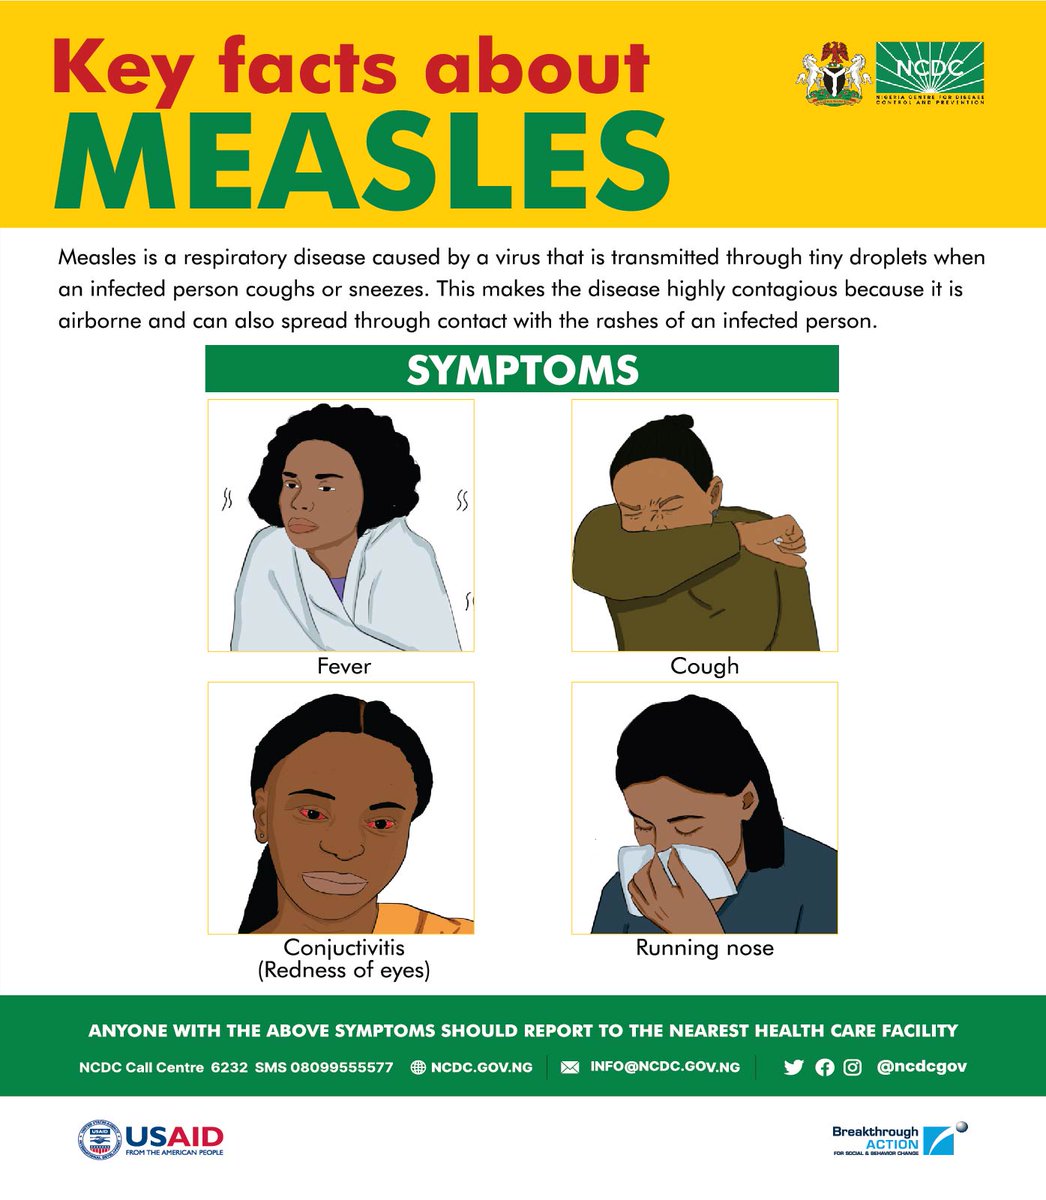 REDNESS OF THE EYE is an early indication of #Measles when observed with symptoms like high-grade fever, running nose, dry cough & tiny spots in the mouth. Please report immediately to a health facility when these symptoms are observed. Visit ncdc.gov.ng/diseases/info/M for more…